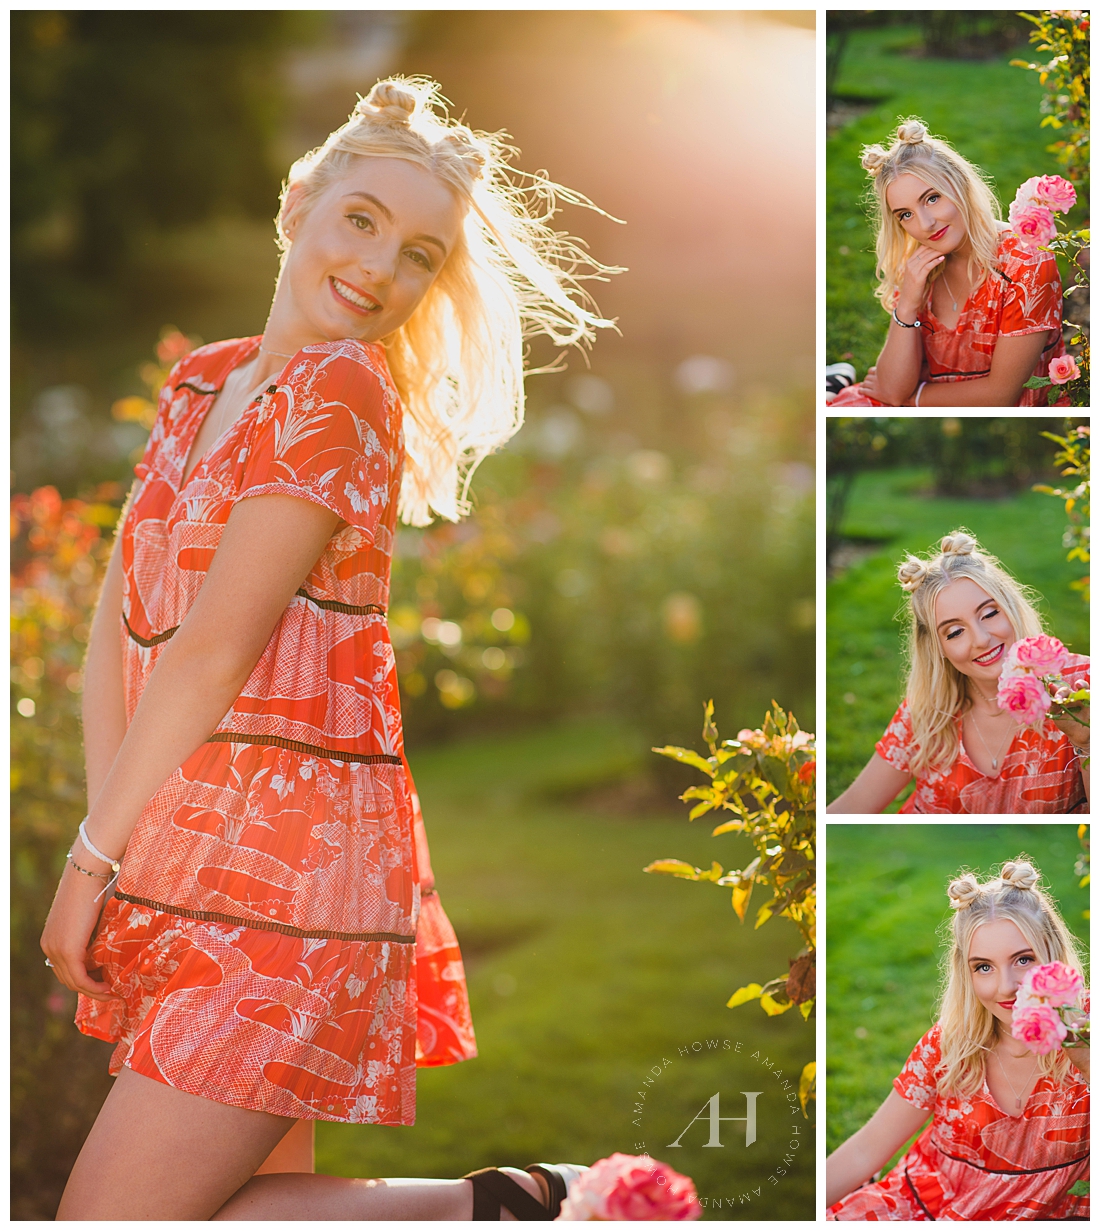 Point Defiance Rose Garden Portraits of High School Senior Girl in a Red Dress | Hairstyle Ideas for Senior Portraits, How to Wear Space Buns for Senior Portraits, Outfit Inspo, Hair and Makeup Ideas, Pose Ideas for Senior Girls | Photographed by the Best Tacoma Senior Portrait Photographer Amanda Howse